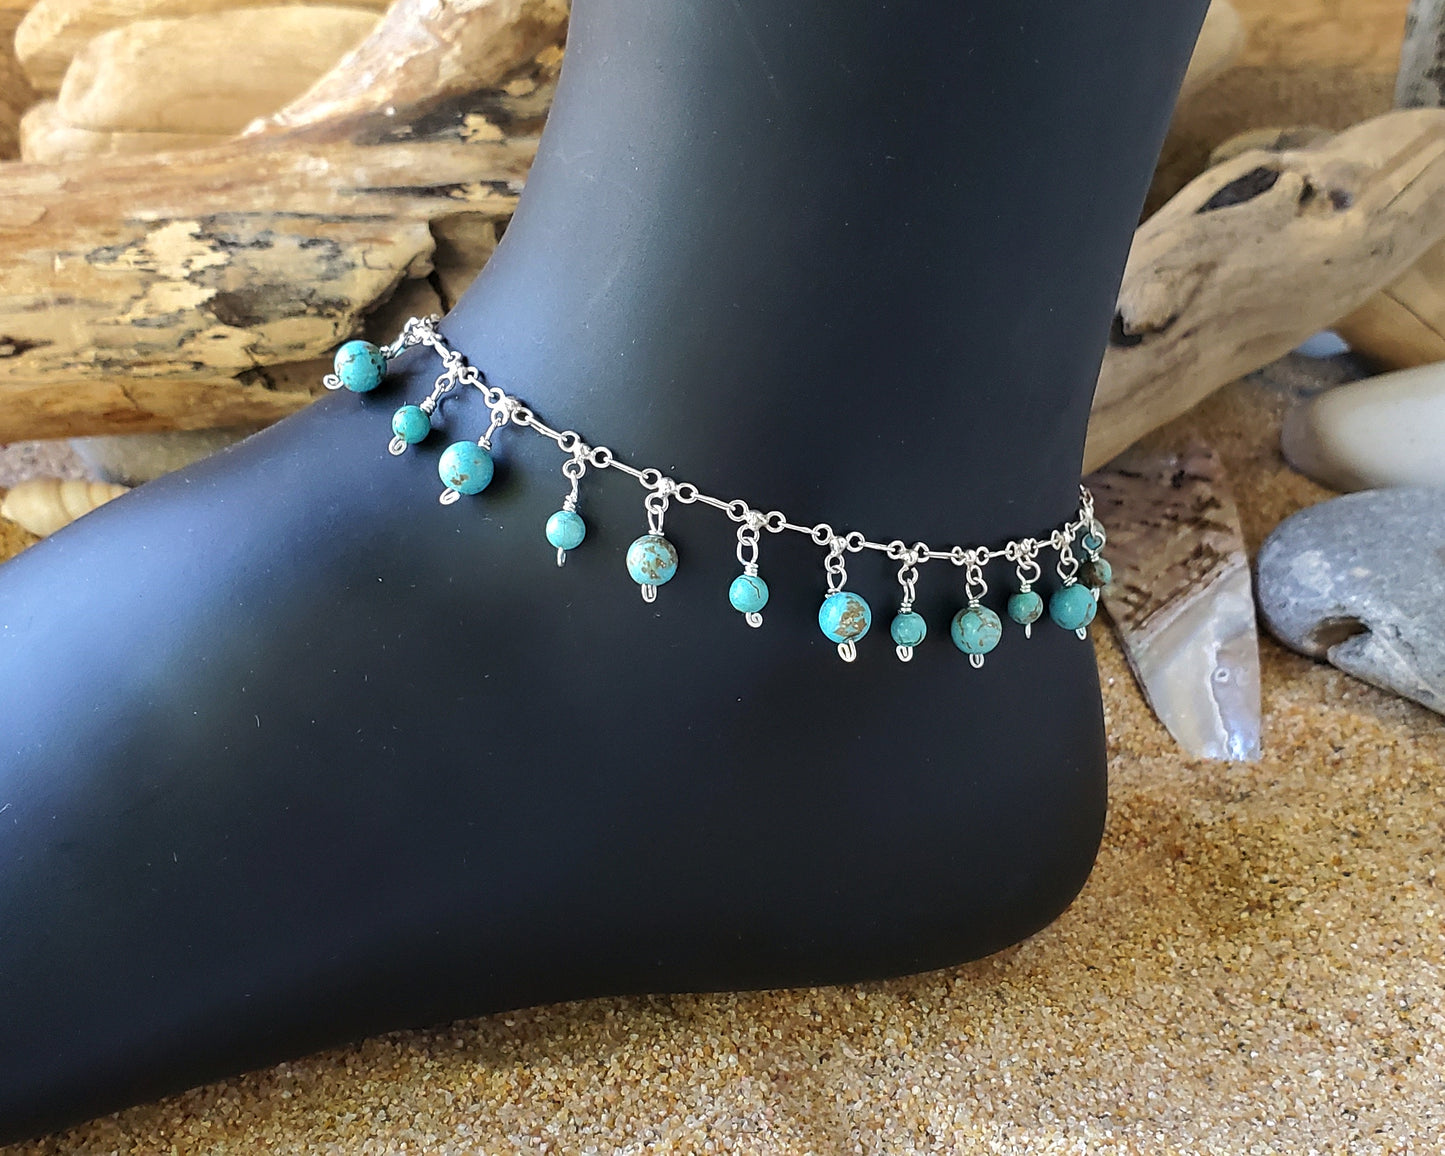 Turquoise Dangle Ankle Bracelet with many Turquoise beads dangling from a decorative silver chain. The anklet is on black foot display on sand beach with beach wood.